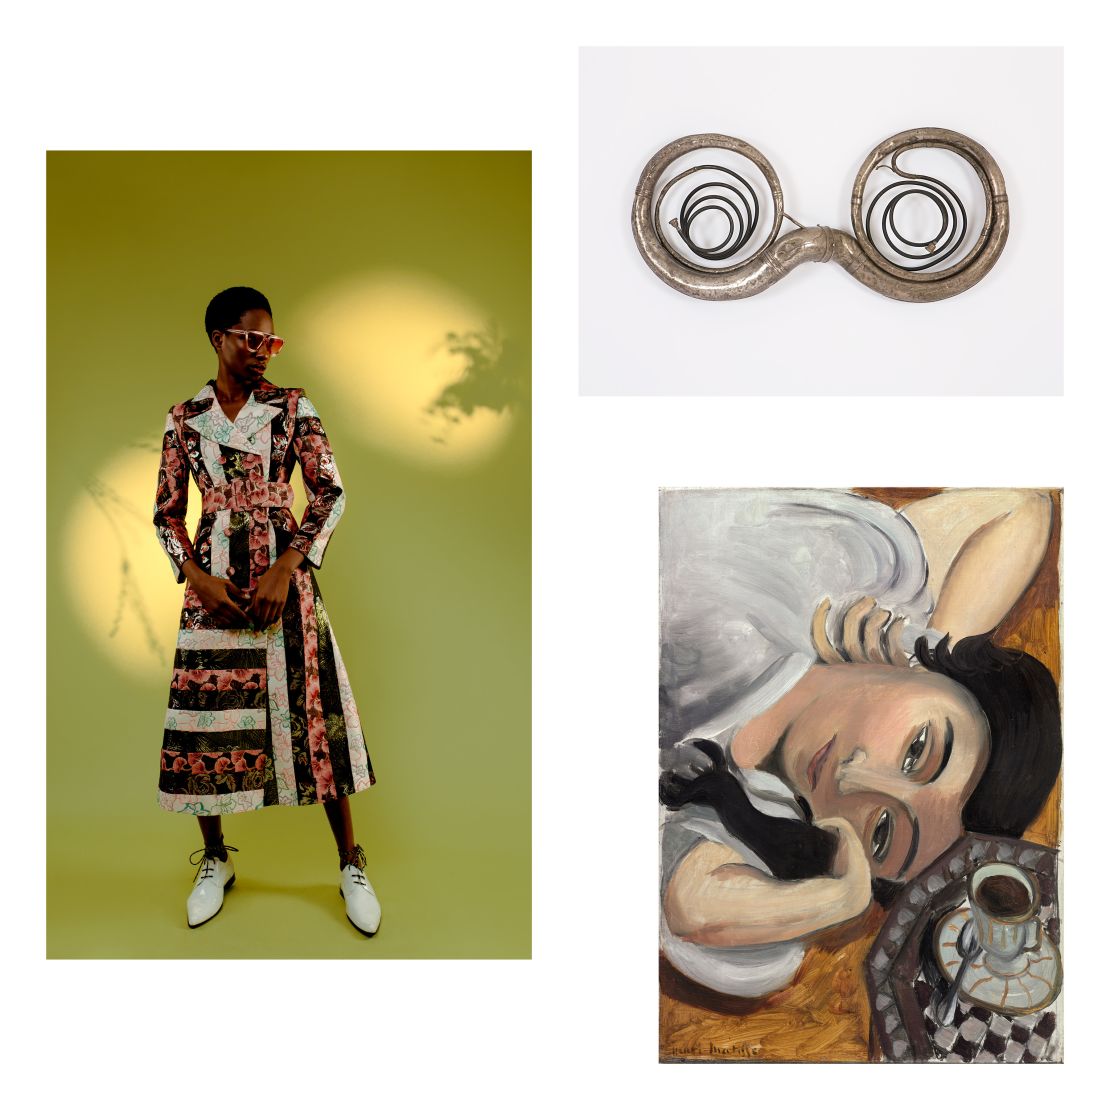 Clockwise from left: Duro Olowu, Spring-Summer 2020, Look 22. Photo: Christina Ebenezer. "Omohundro" (2002) by Terry Adkins. Photo: Courtesy of the artist and Salon 94, New York. "Laurette with a Cup of Coffee" (1916-17) by Henri Matisse. Courtesy of Succession H. Matisse / Artists Rights Society (ARS), New York). Photo: The Art Institute of Chicago/ Art Resource, NY.